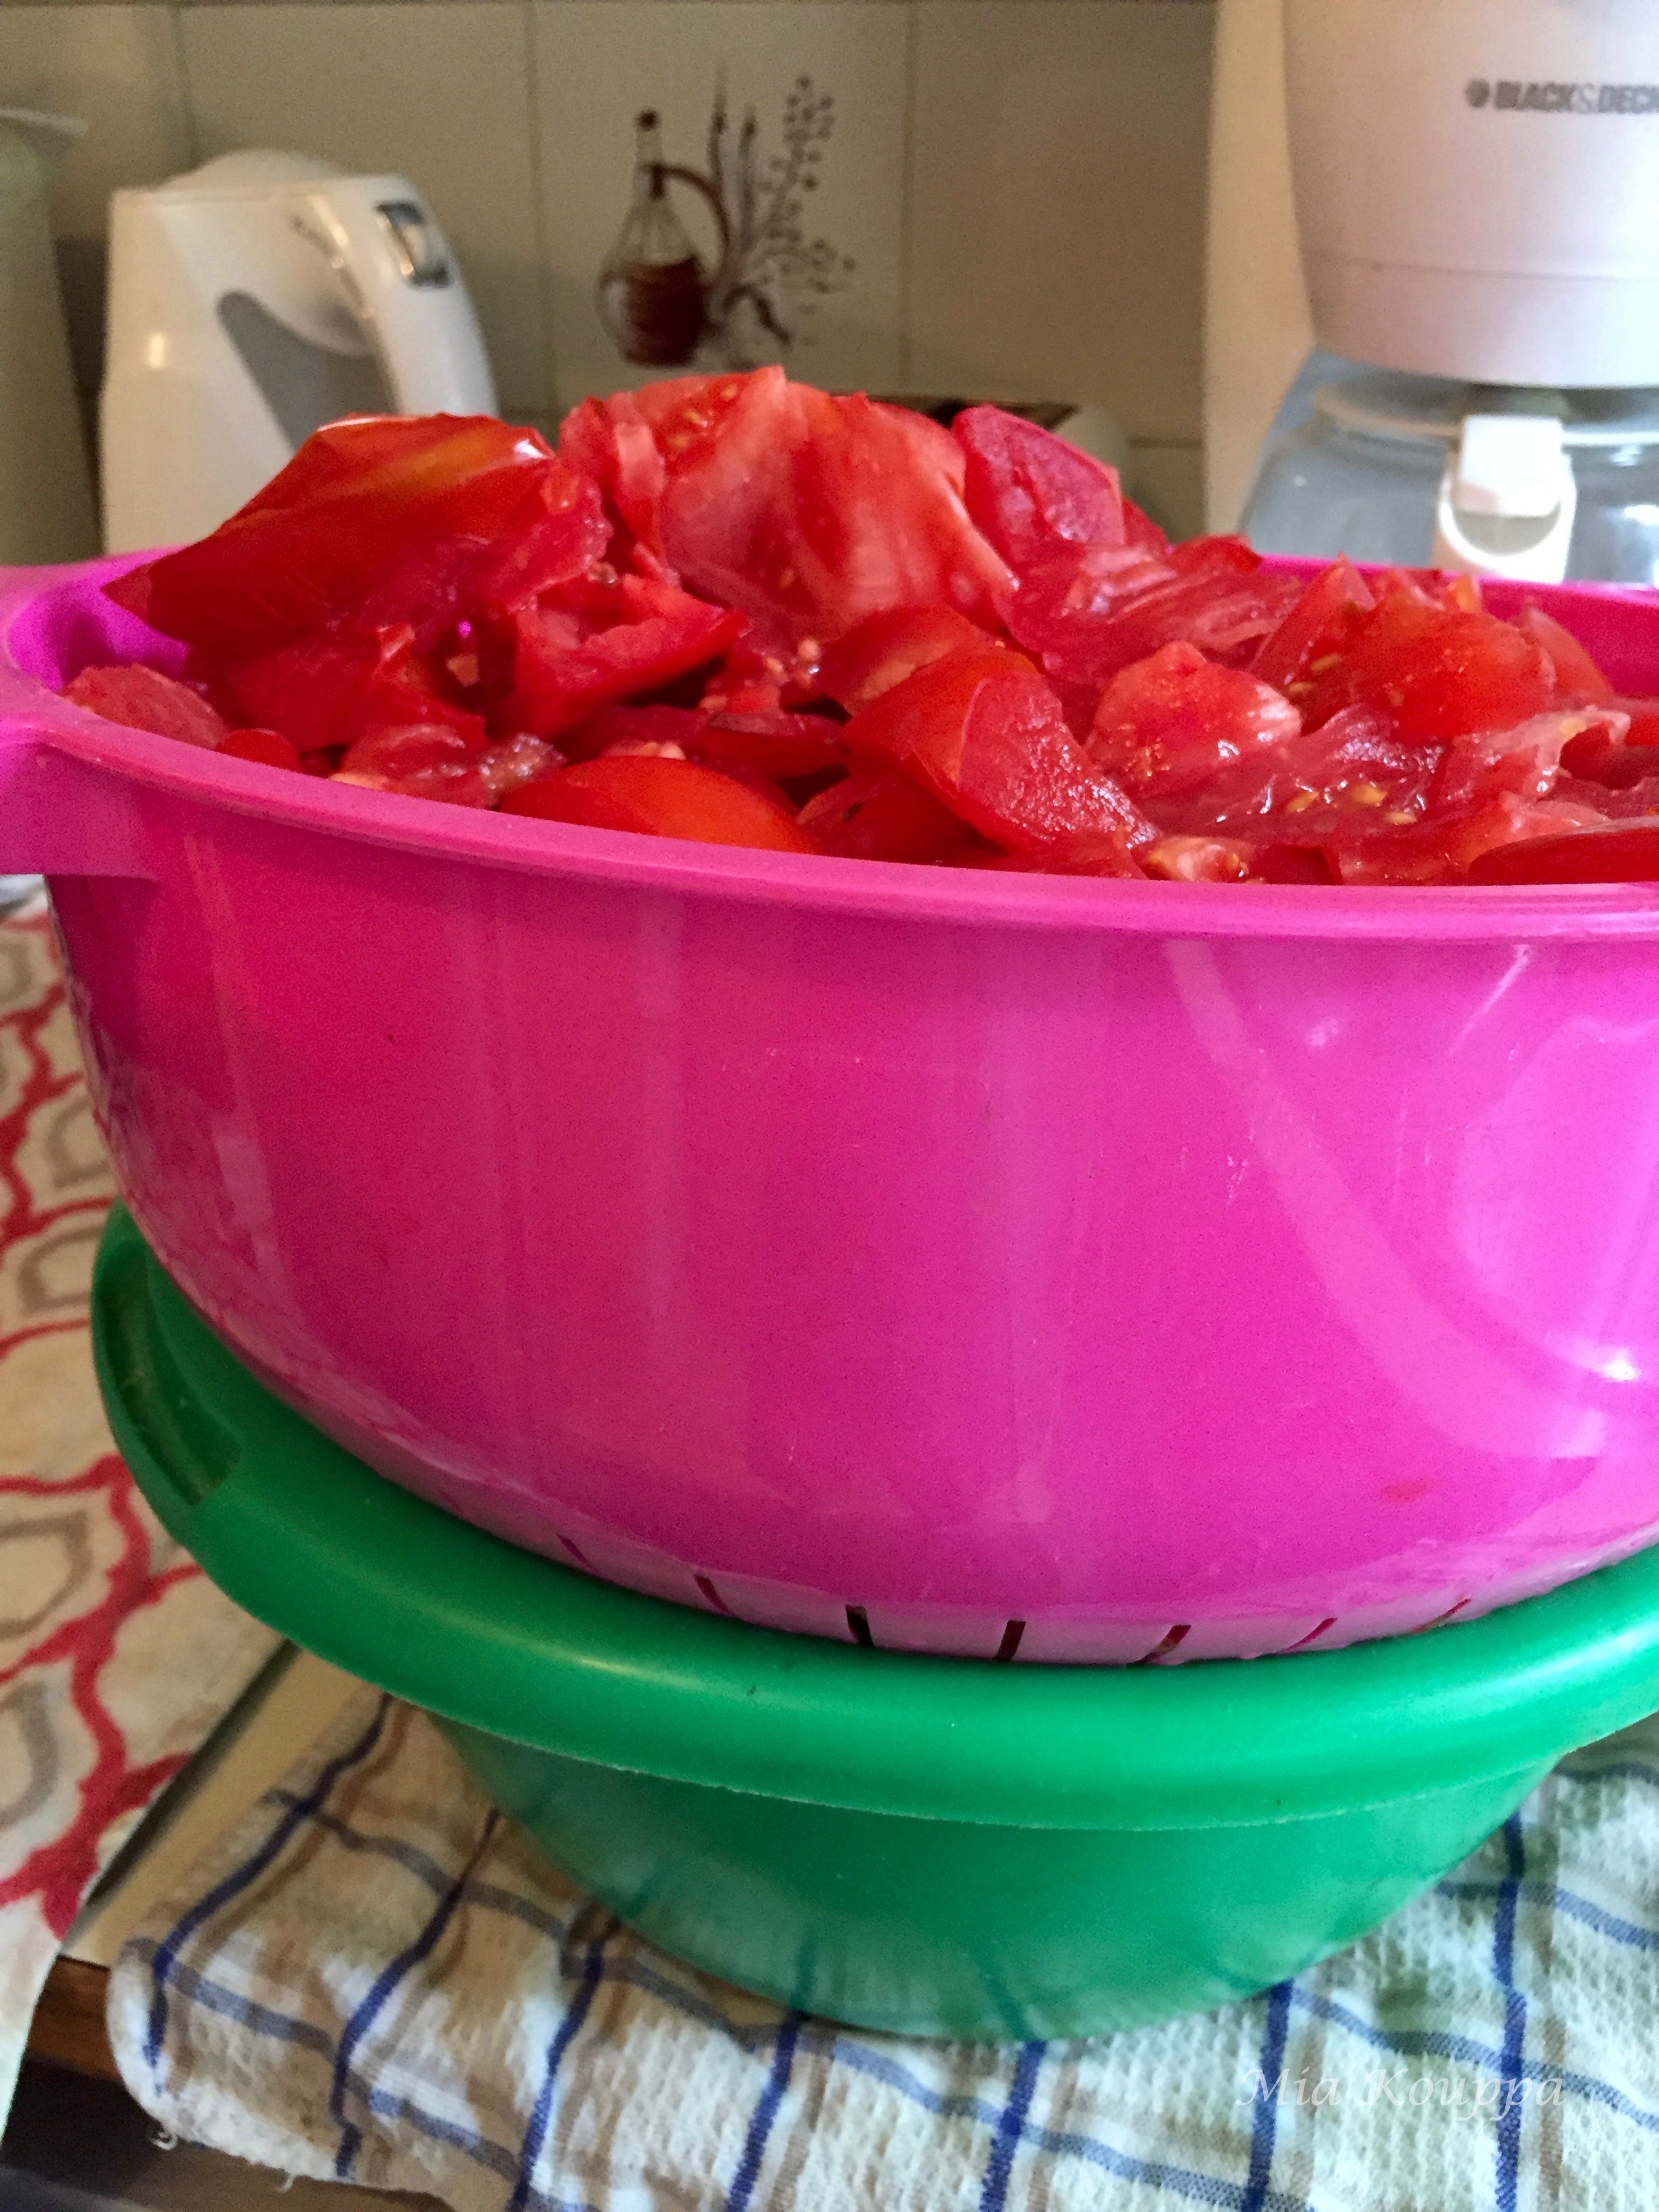 Draining the tomatoes, for at least 12 hours